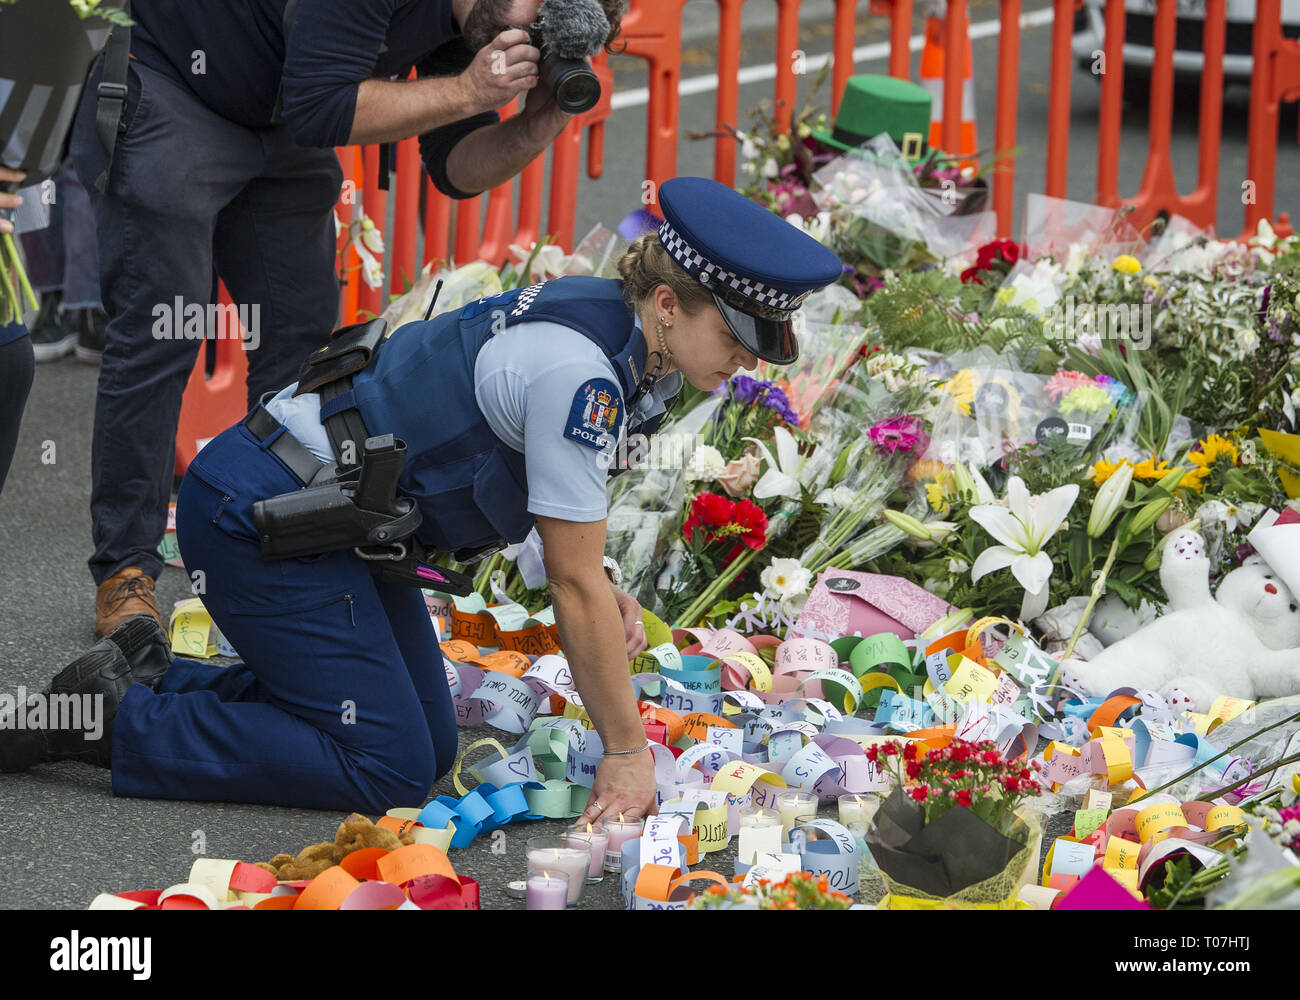 Christchurch, Canterbury, New Zealand. 18th Mar, 2019. A police officer helps arrange tributes following a ''Students' Uniting in Love'' vigil in Hagley Park, near the Al Noor mosque, where 41 people were killed. Thousands of local school students attended the vigil, organized by Cashmere High School students, where several current and former pupils were killed or wounded in two city mosque shooting that left at least 50 people dead. Credit: PJ Heller/ZUMA Wire/Alamy Live News Stock Photo